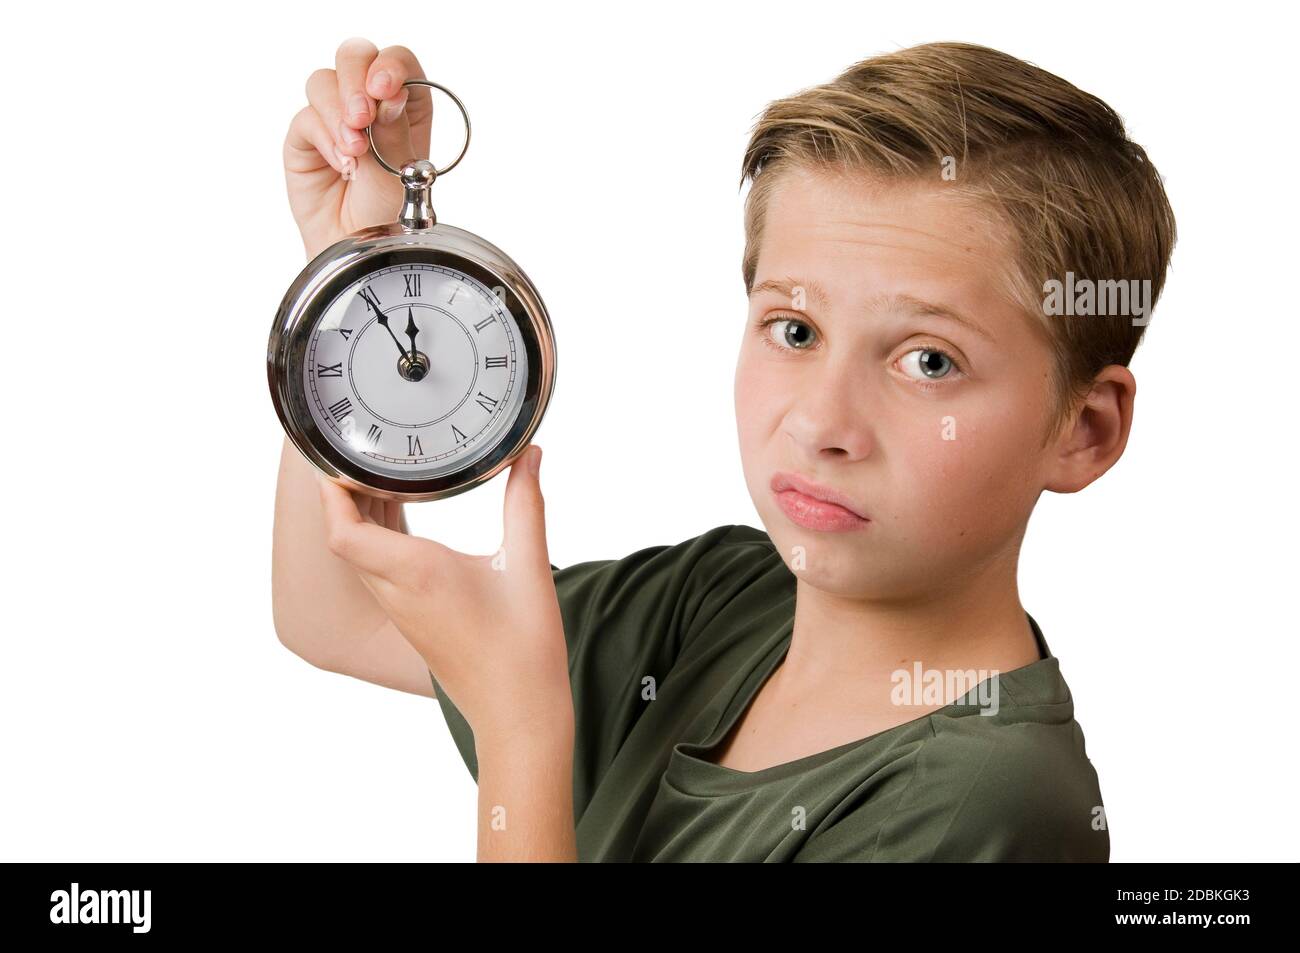 Lateral head-and-shoulders view of a 12-year-old Caucasian boy with his right hand holding an oversized pocket watch with a pointer 5 minutes to 12 an Stock Photo